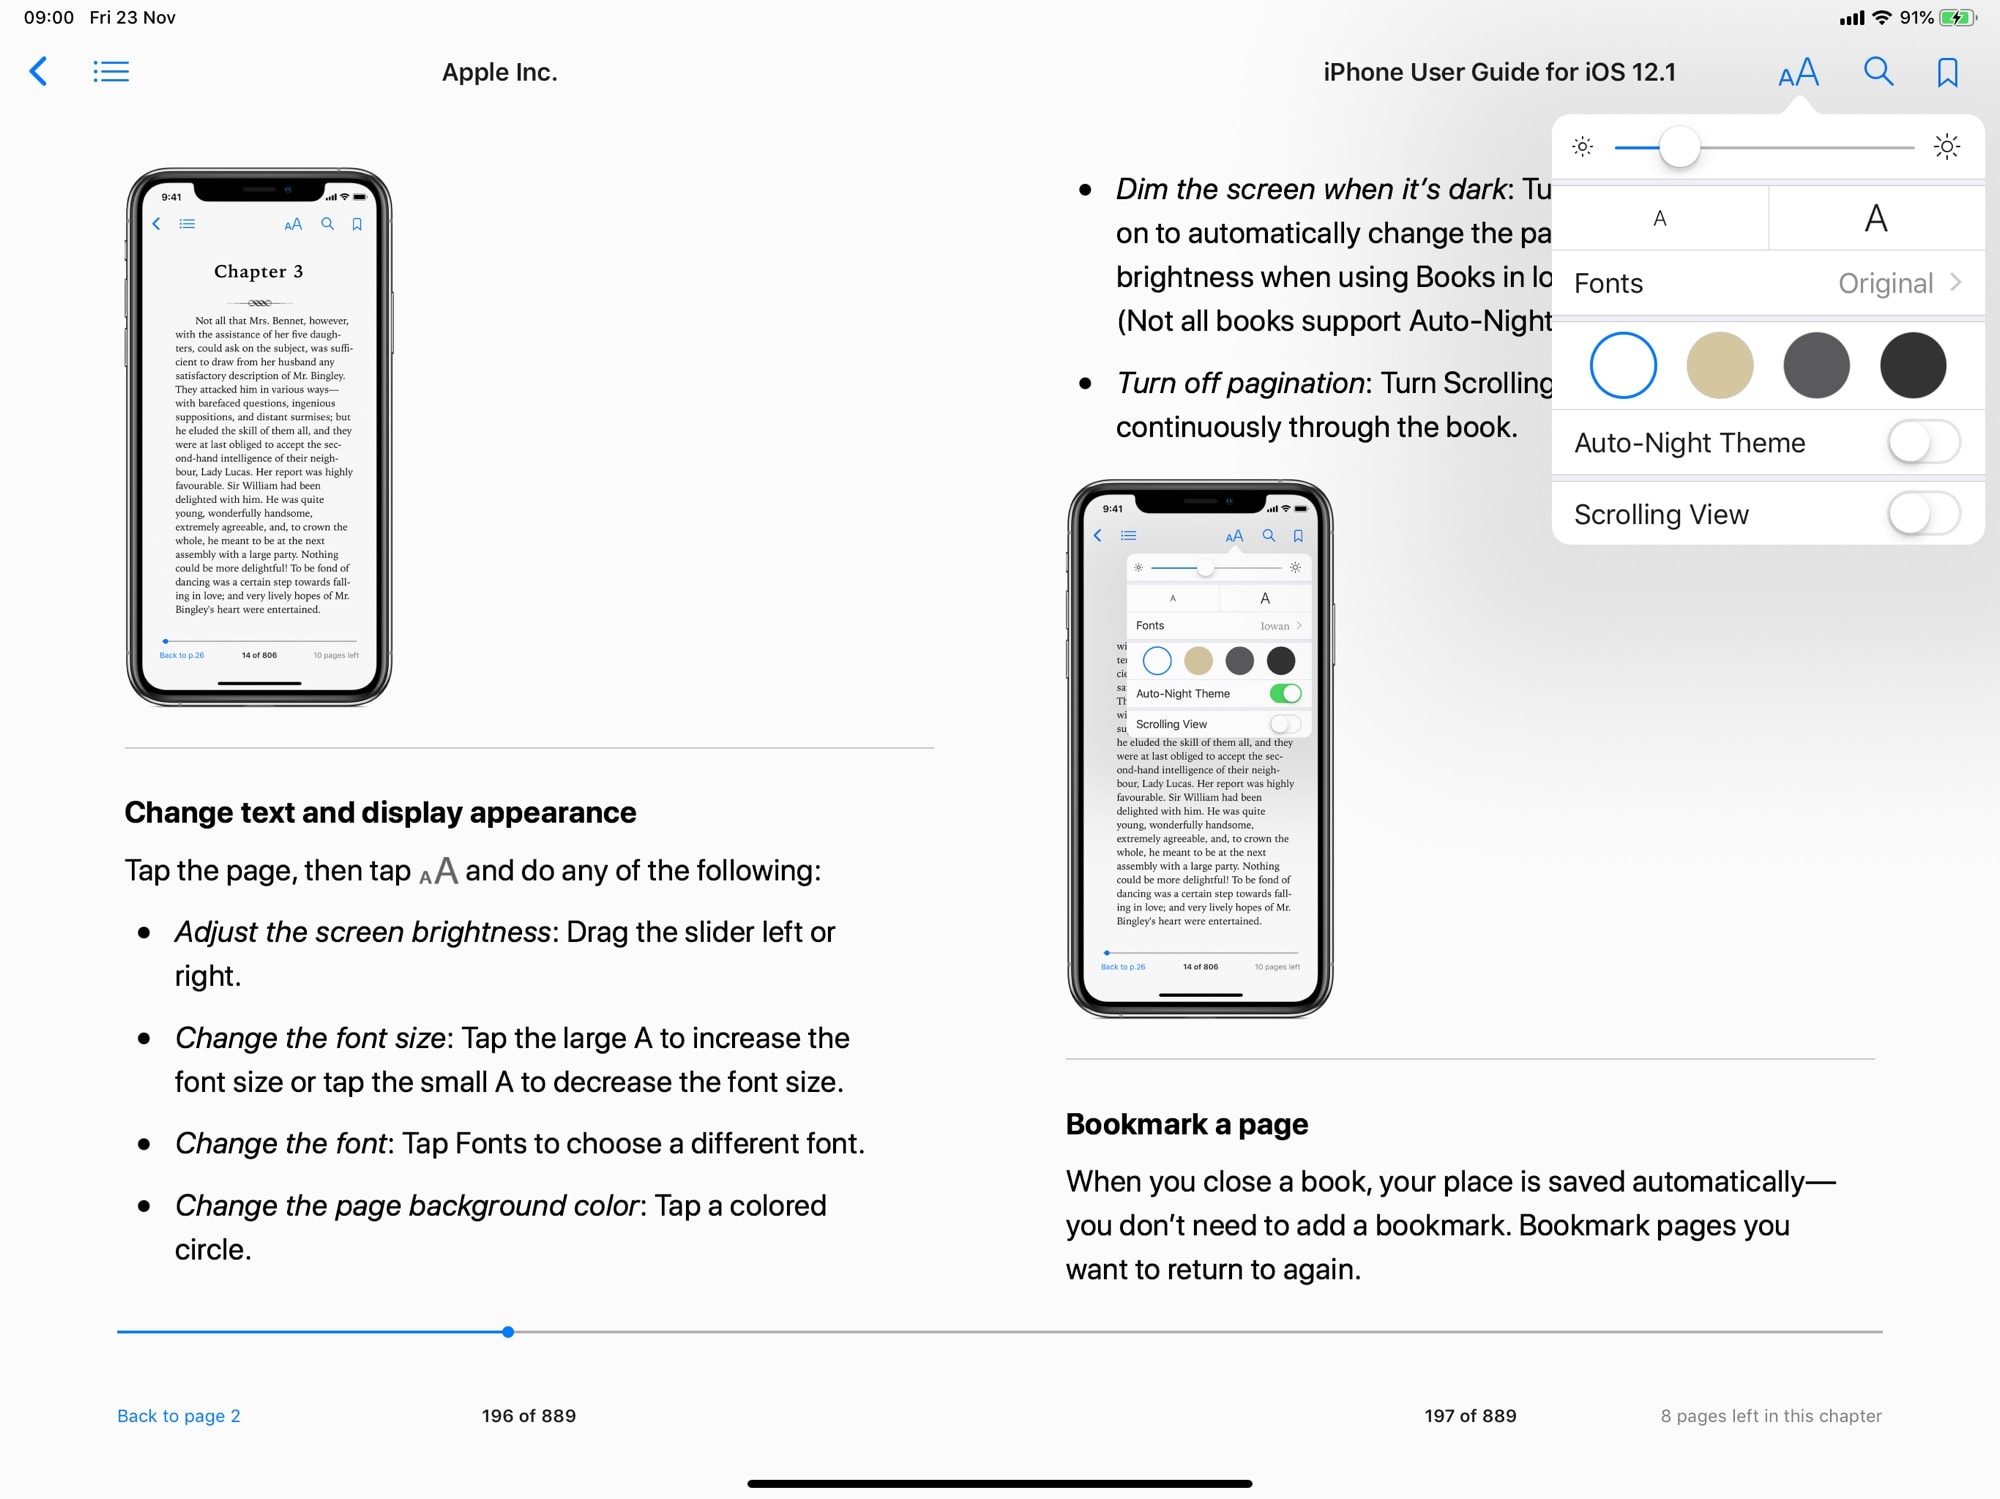 Thankfully you can adjust the in-book view from dark to light in the Apple Books app.